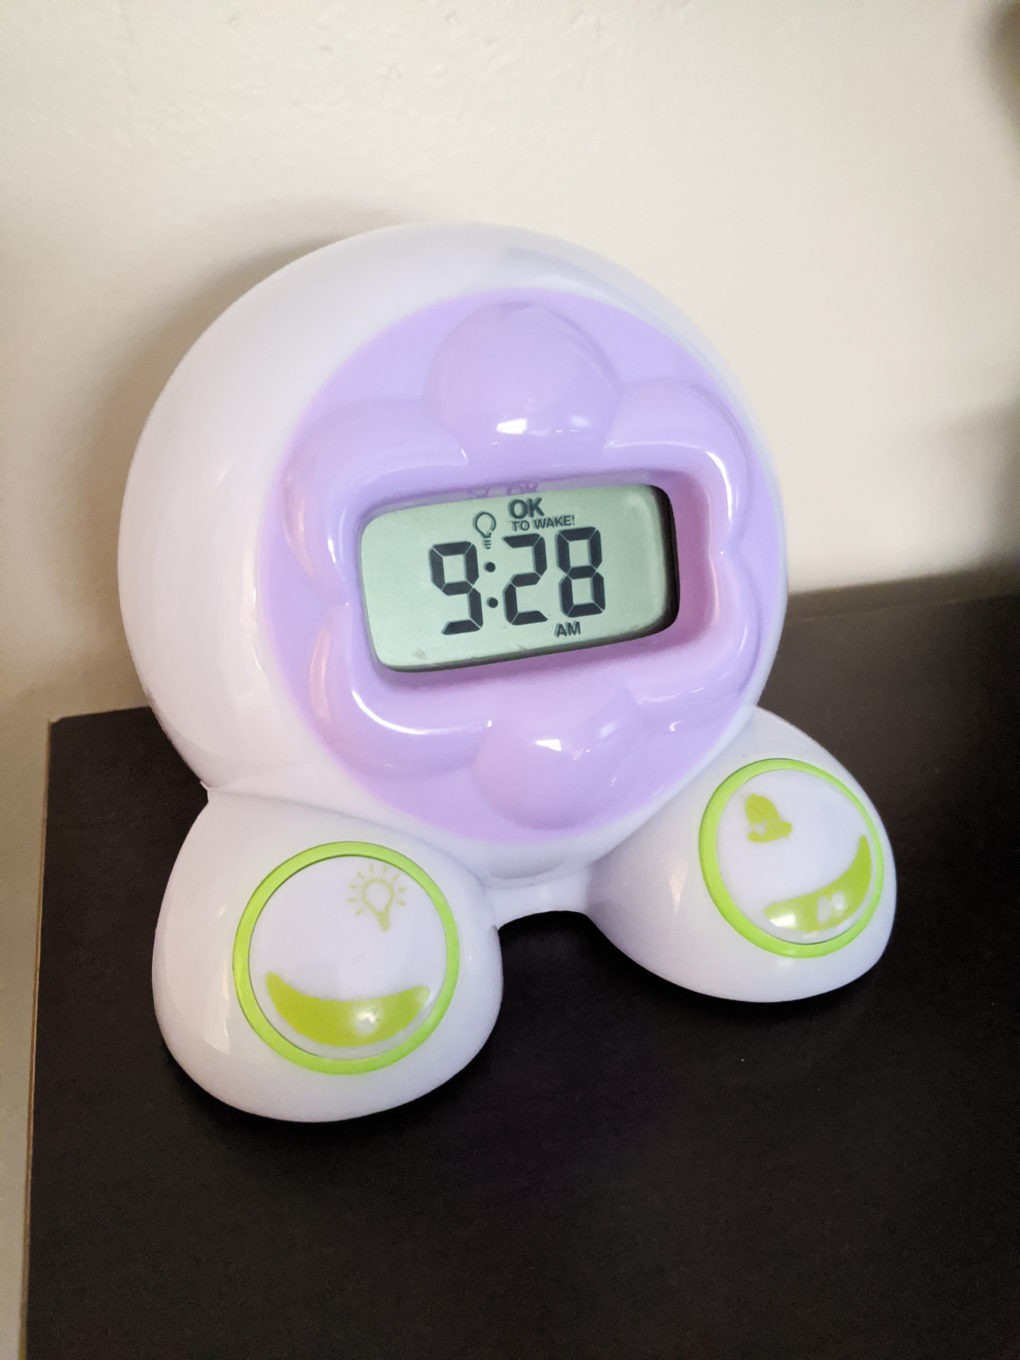 OK to wake clock for helping your kids not wake up too early.